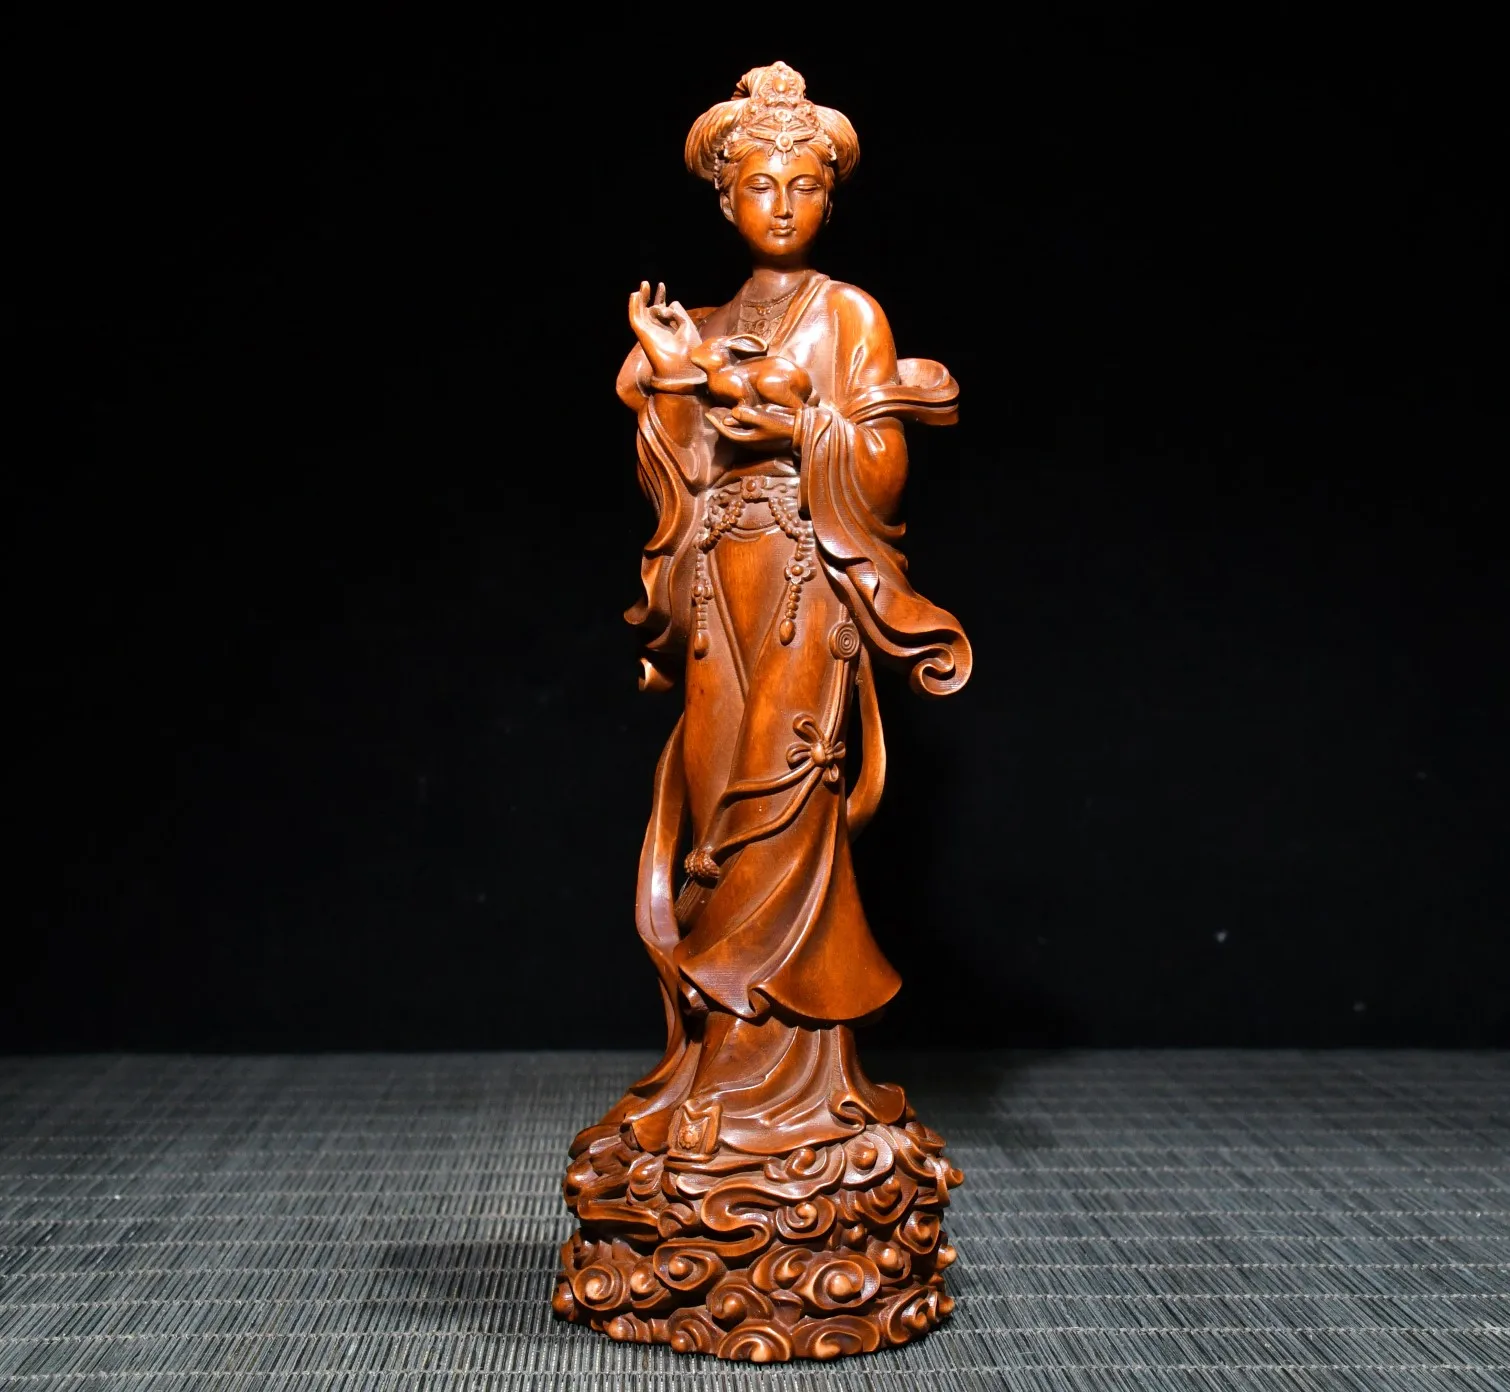 

Huangyang Wood Carved Plastic Ornaments are Exquisitely Crafted and Have a Beautiful Appearance Which is Worth Collecting